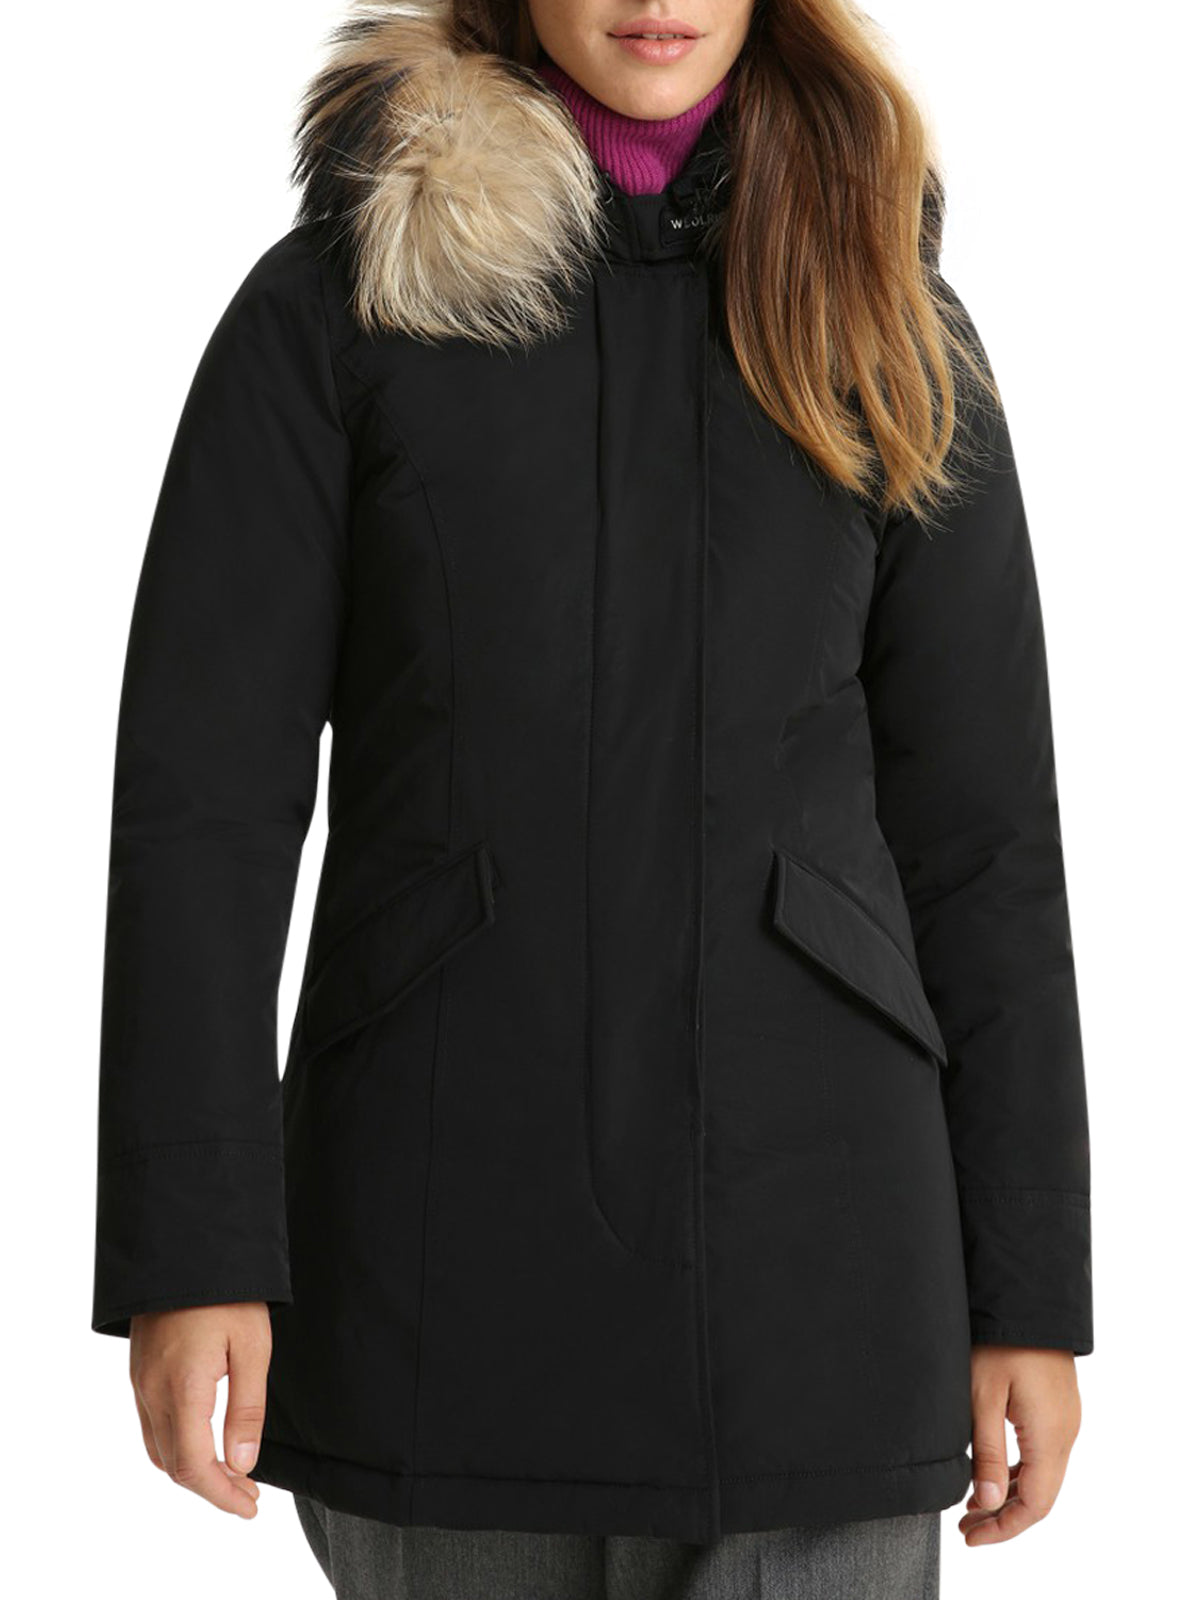 Luxe Arctic Parka with removable fur